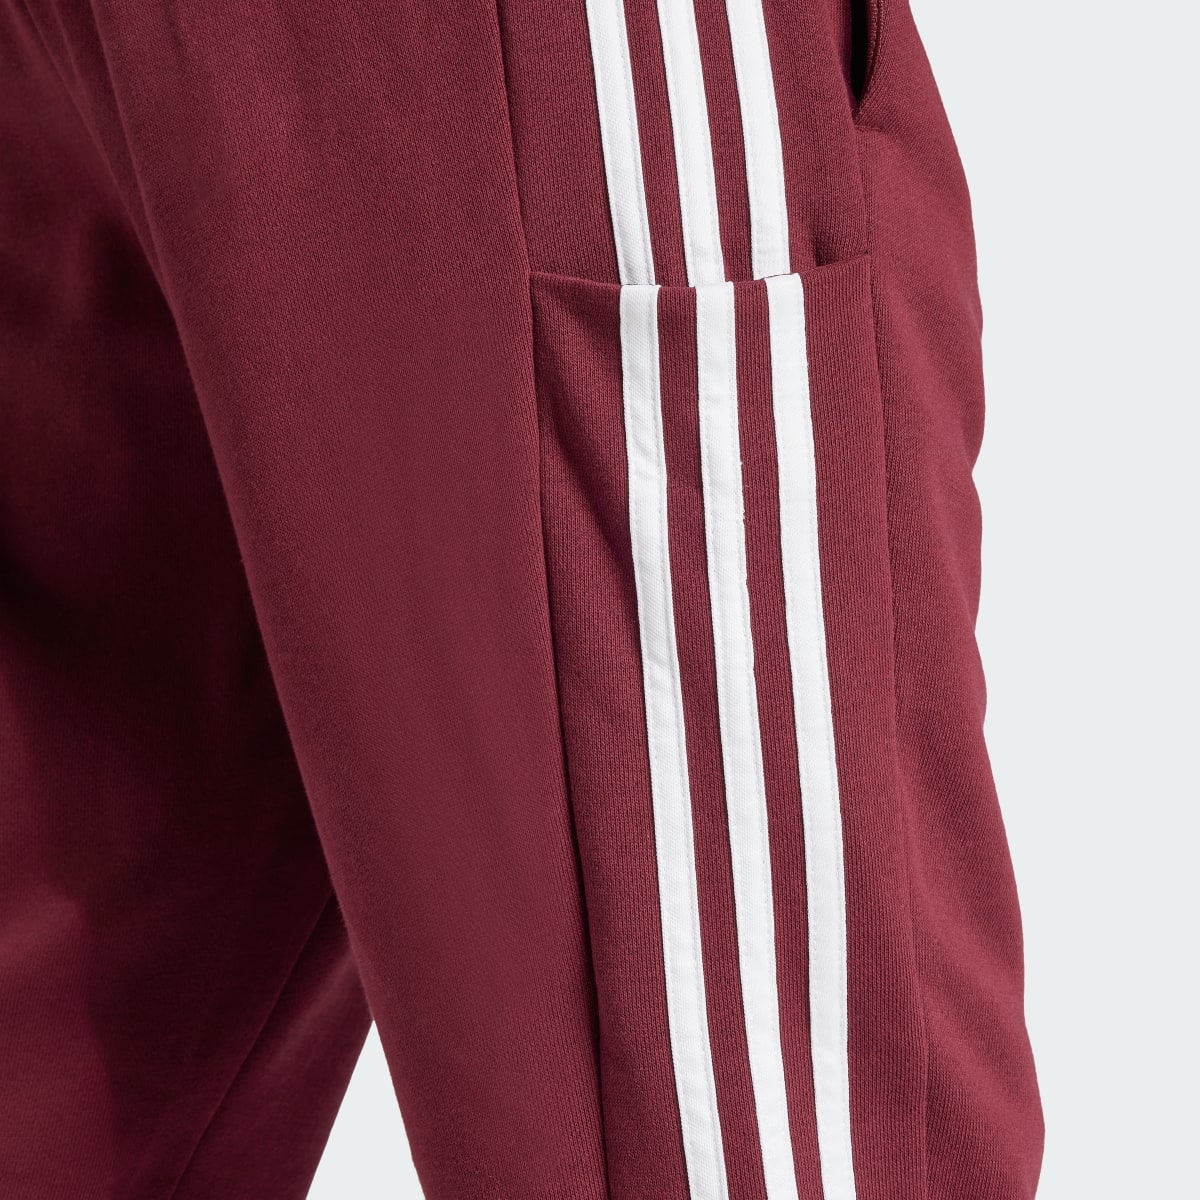 Adidas Essentials French Terry Tapered Cuff 3-Stripes Pants. 5